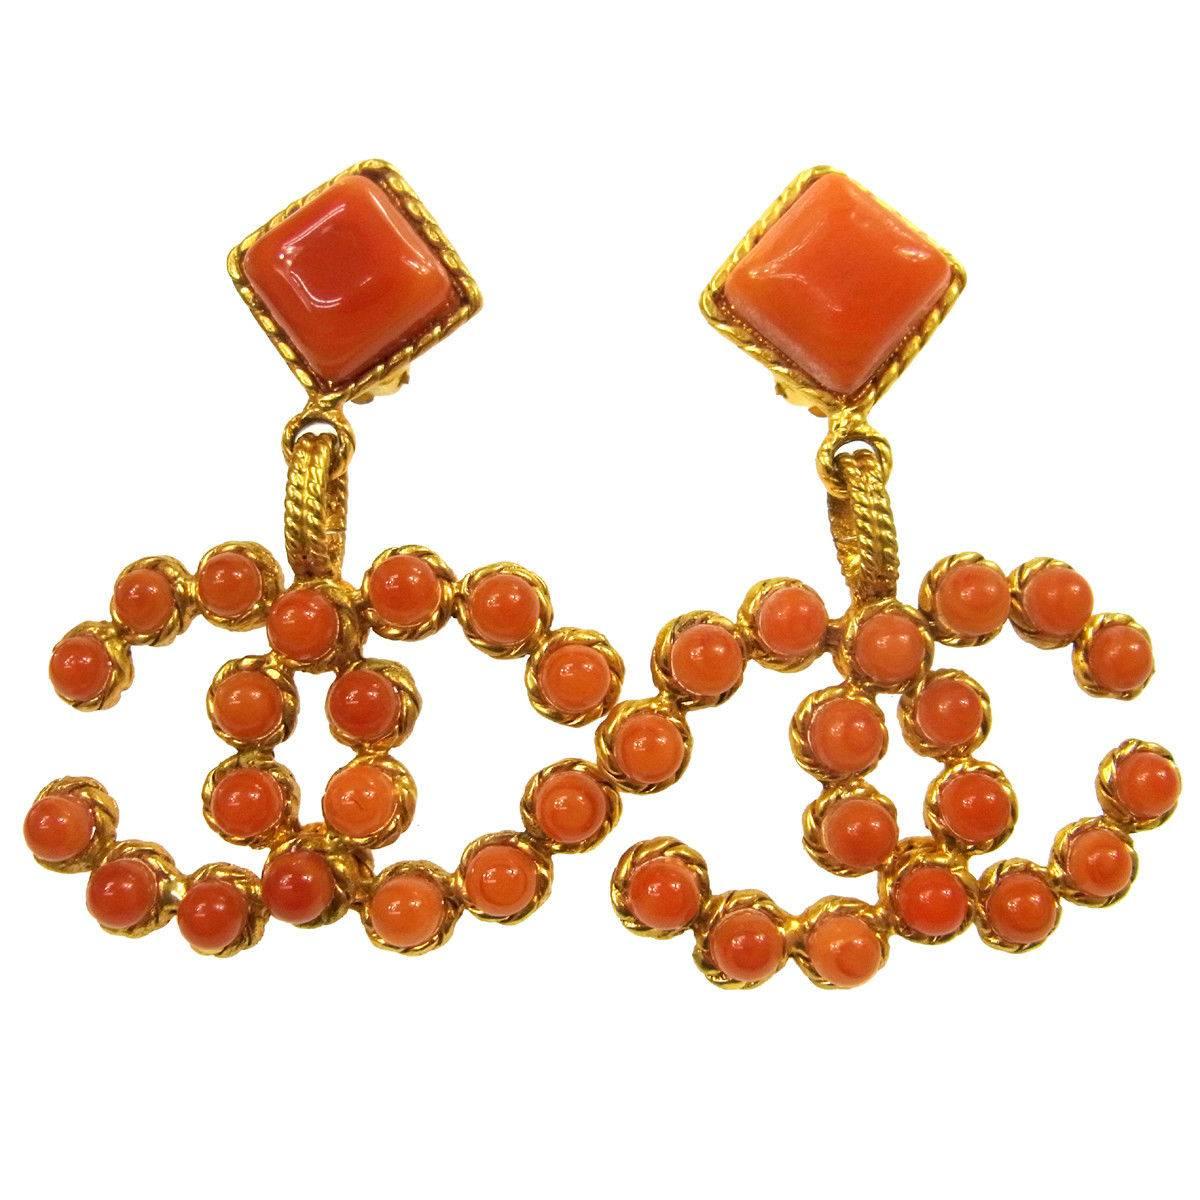 Chanel Textured Gold Coral Charm Evening Dangle Drop Statement Earrings in Box 